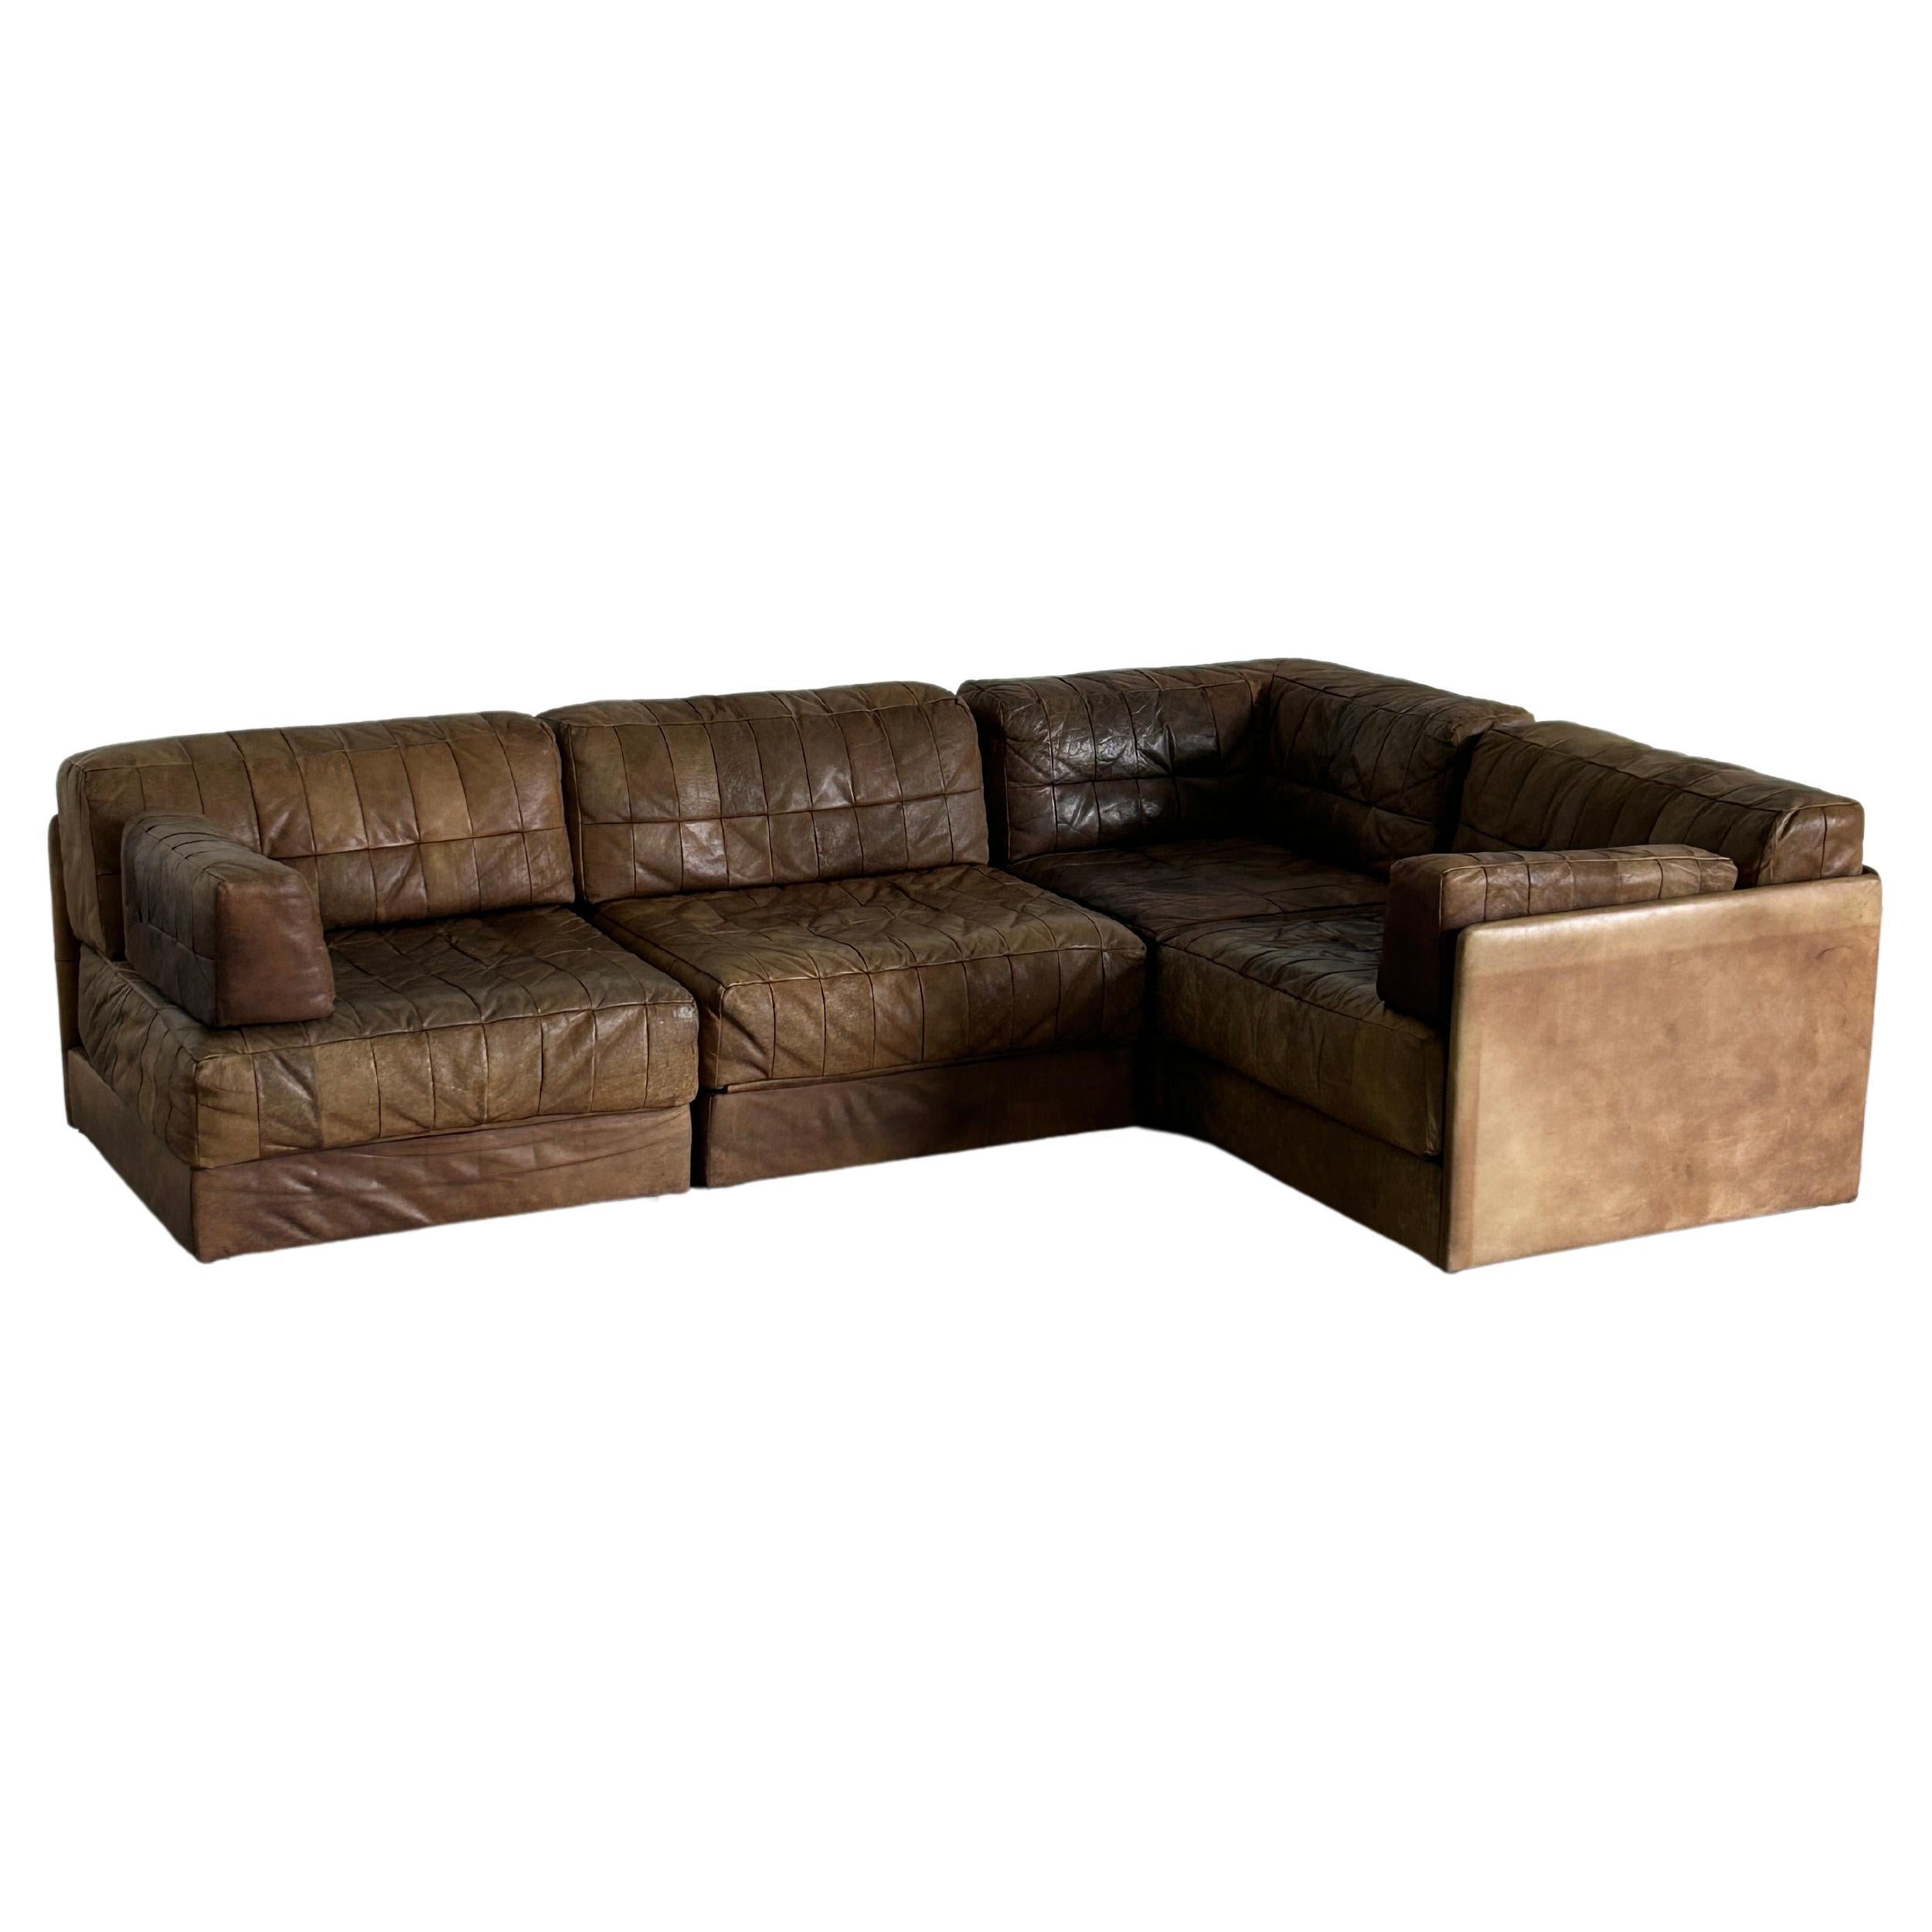 Mid-Century-Modern Leather Modular Sofa in the style of De Sede Patchwork, 1970s